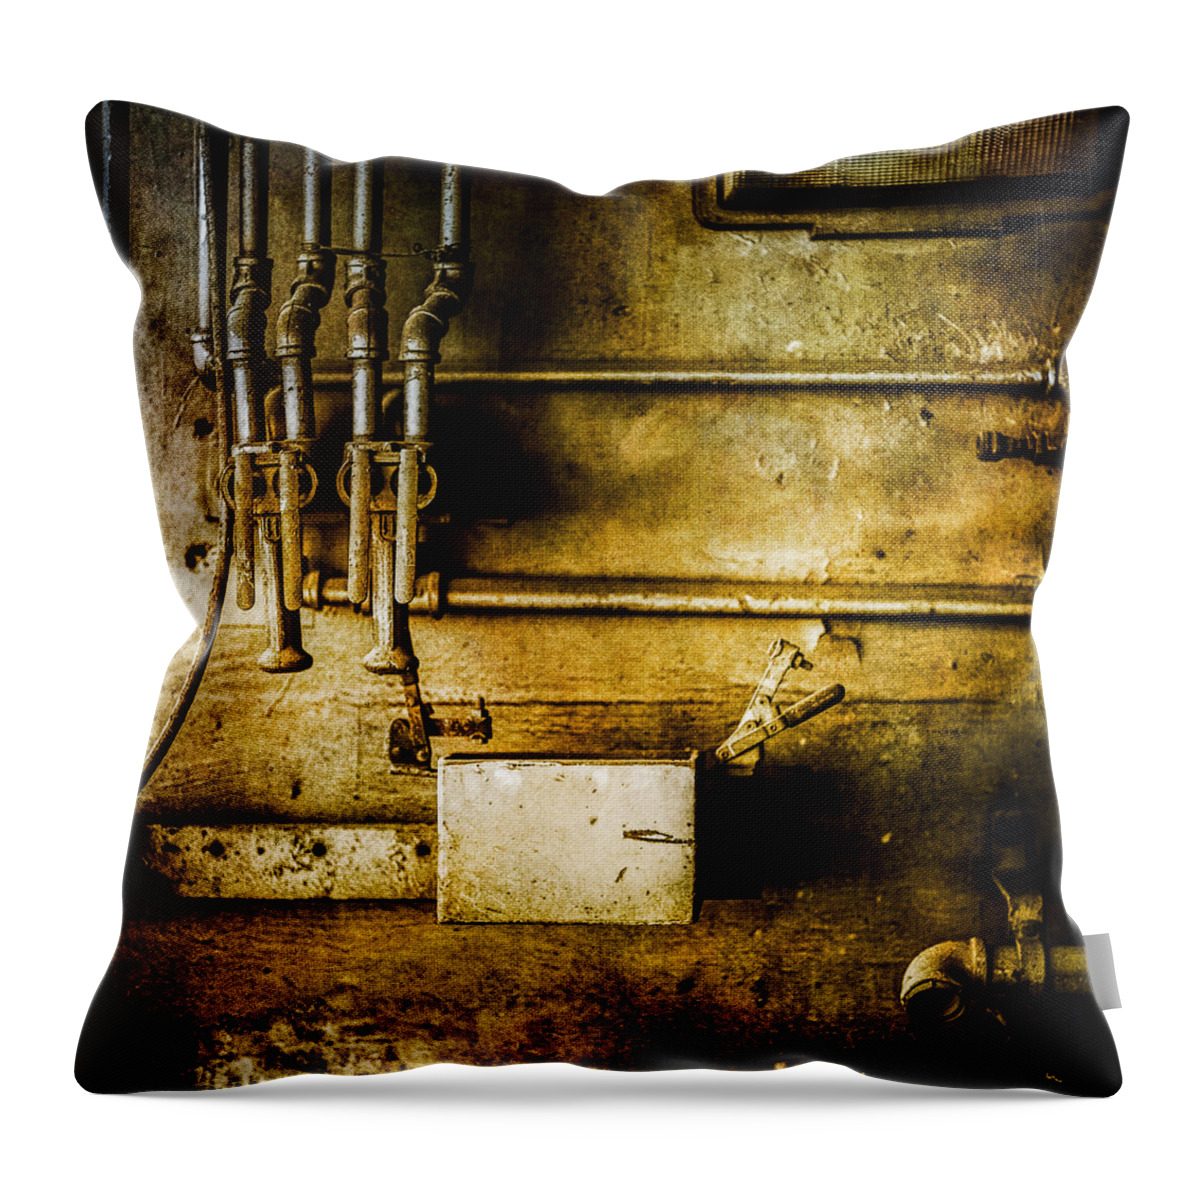 Abandoned Throw Pillow featuring the photograph Pacific Airmotive Corp 03 by YoPedro